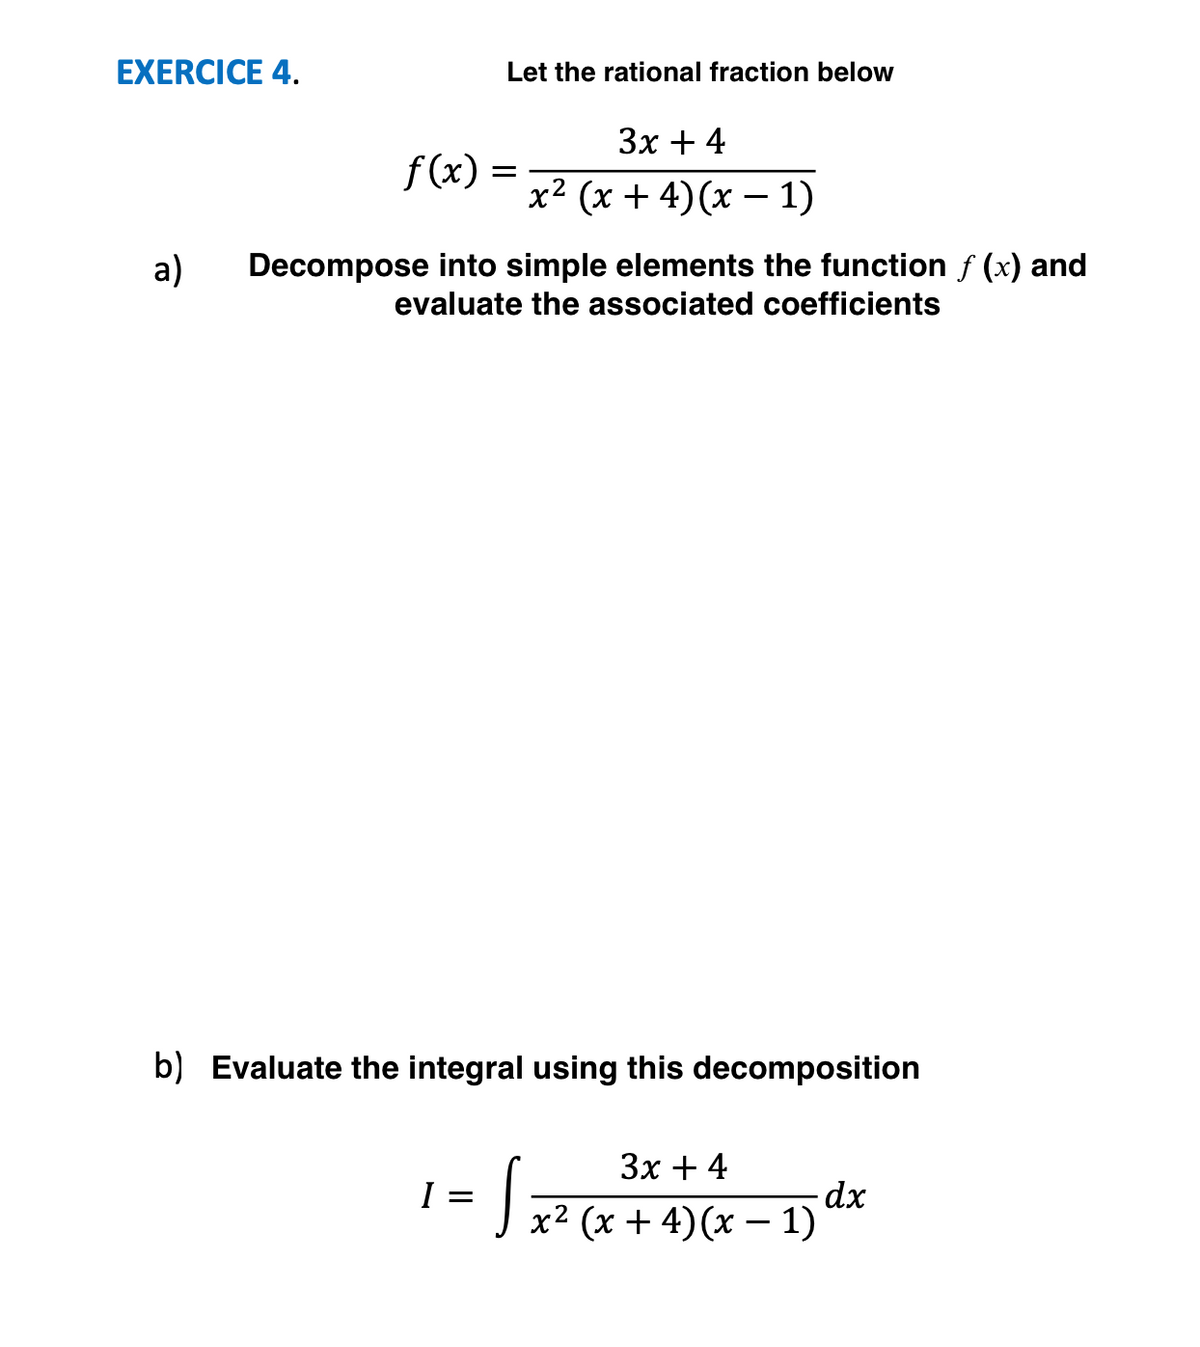 EXERCICE 4.
Let the rational fraction below
Зх + 4
f(x) =
x² (x + 4)(x – 1)
a)
Decompose into simple elements the function f (x) and
evaluate the associated coefficients
b) Evaluate the integral using this decomposition
Зх + 4
J x² (x + 4)(x – 1)
